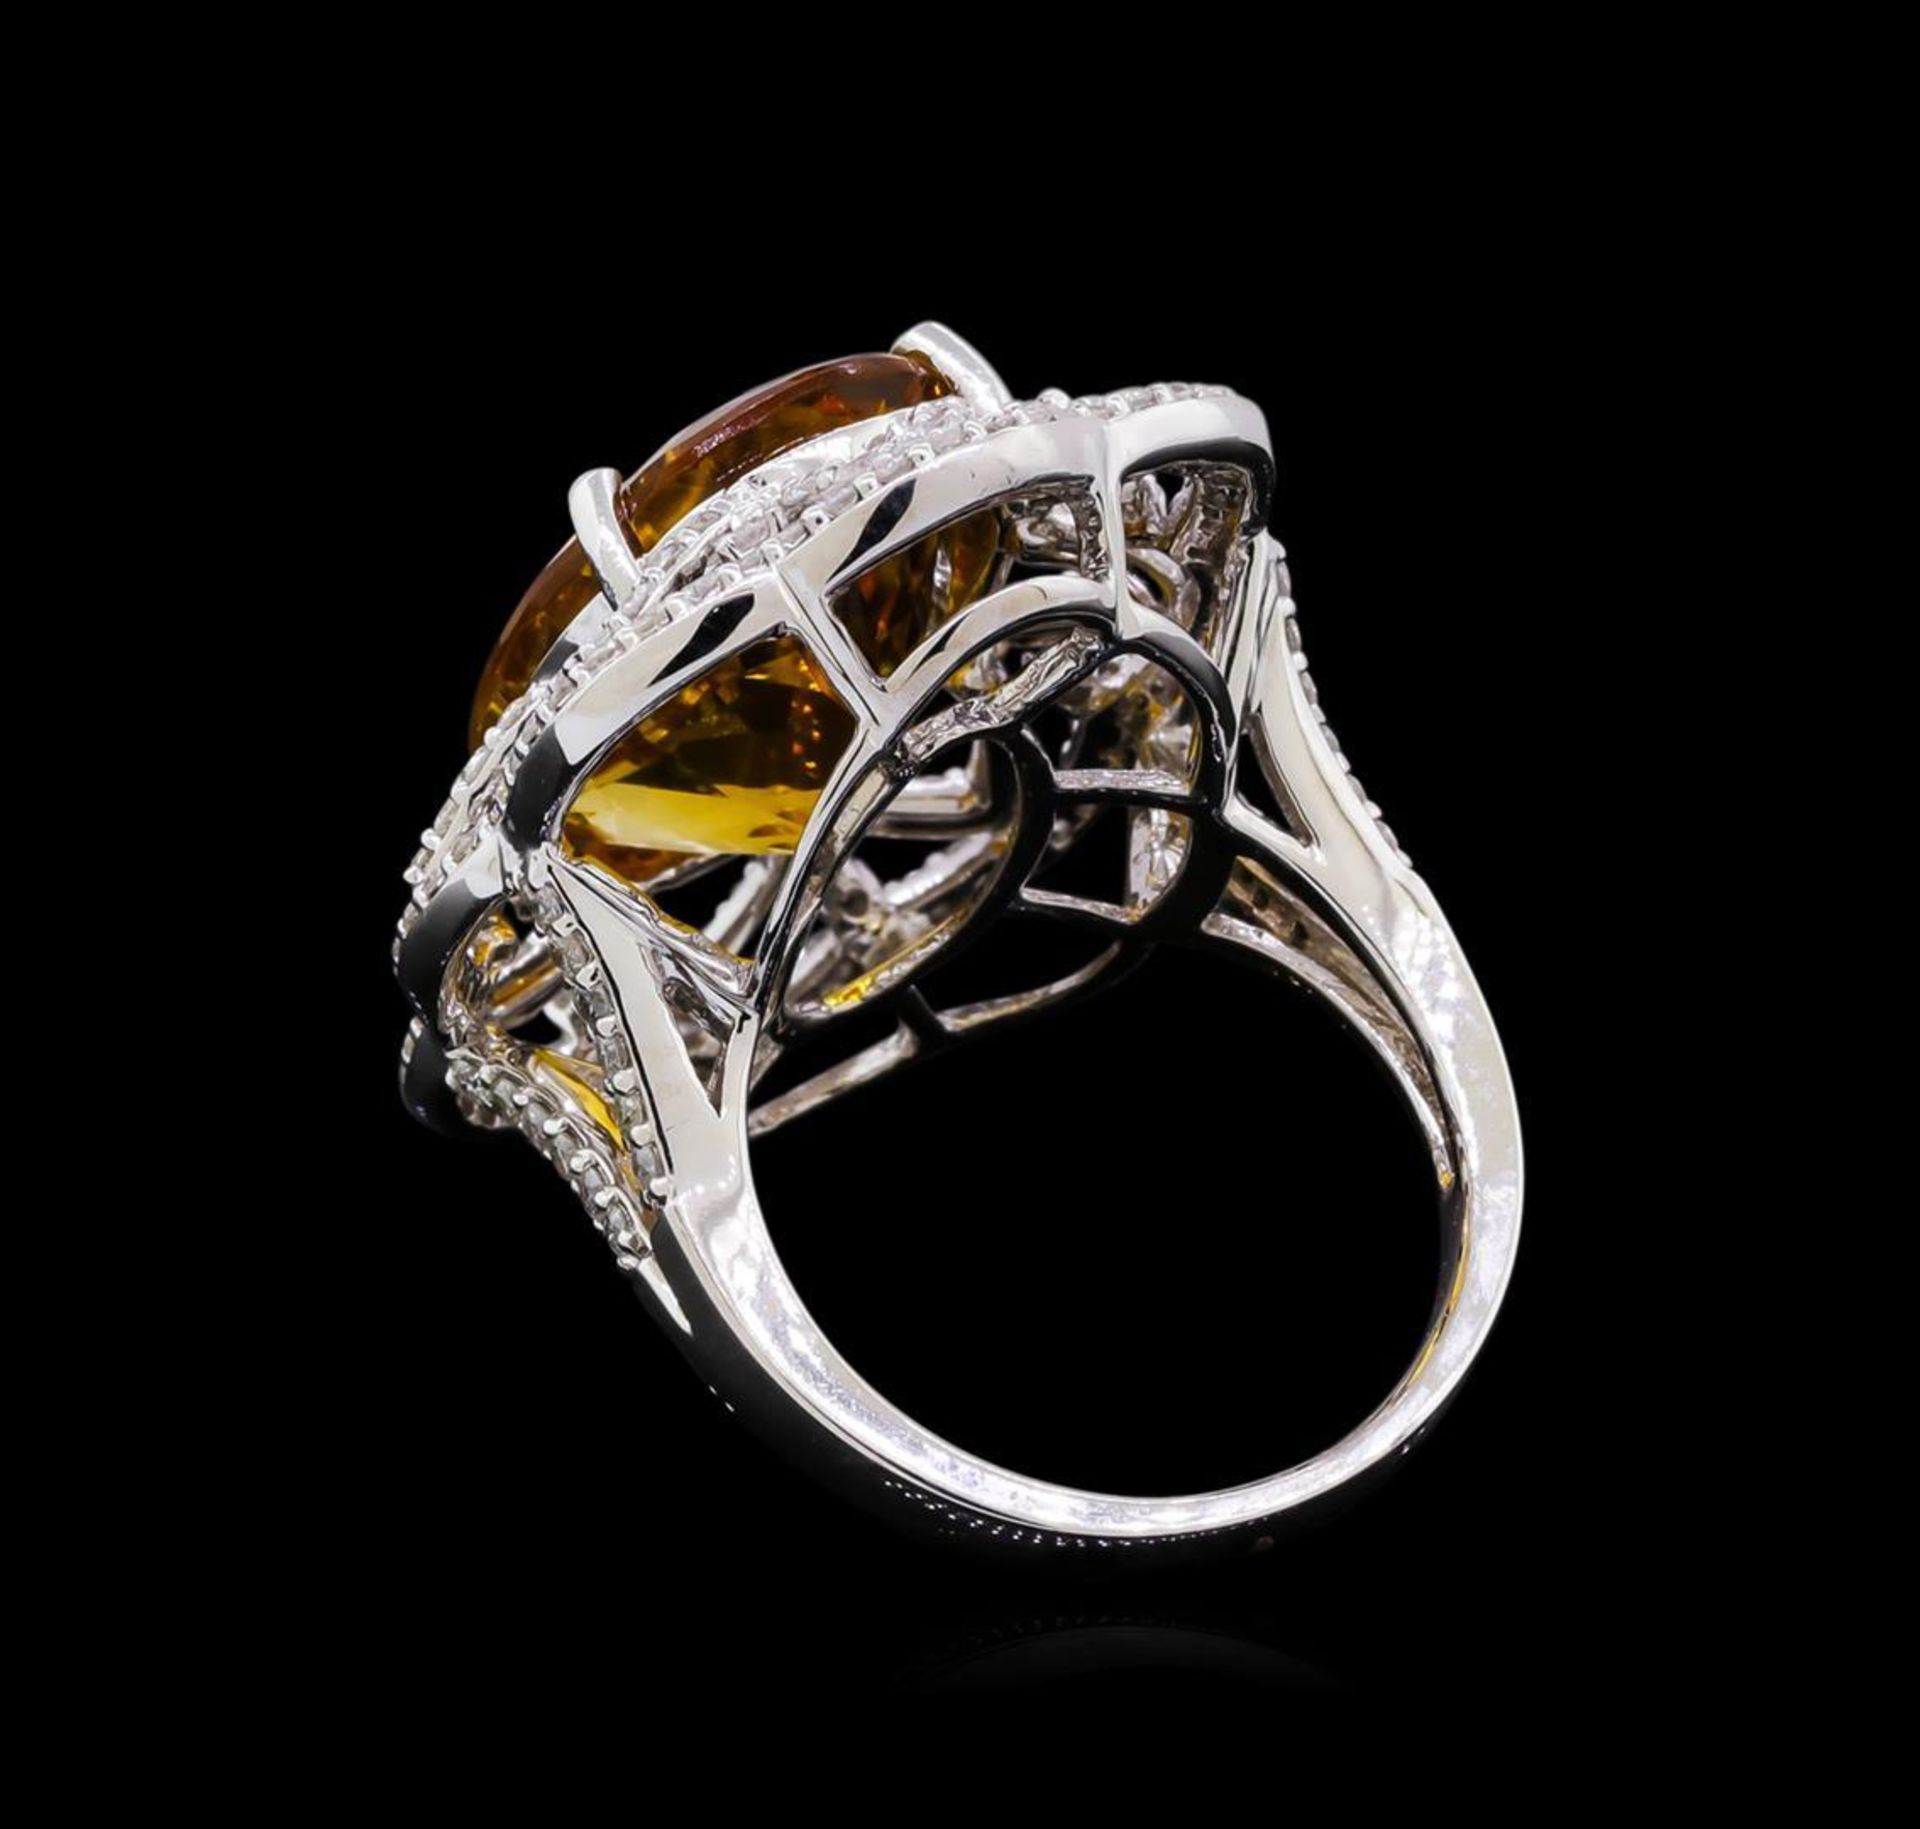 14KT White Gold 10.91 ctw Citrine and Diamond Ring - Image 3 of 5